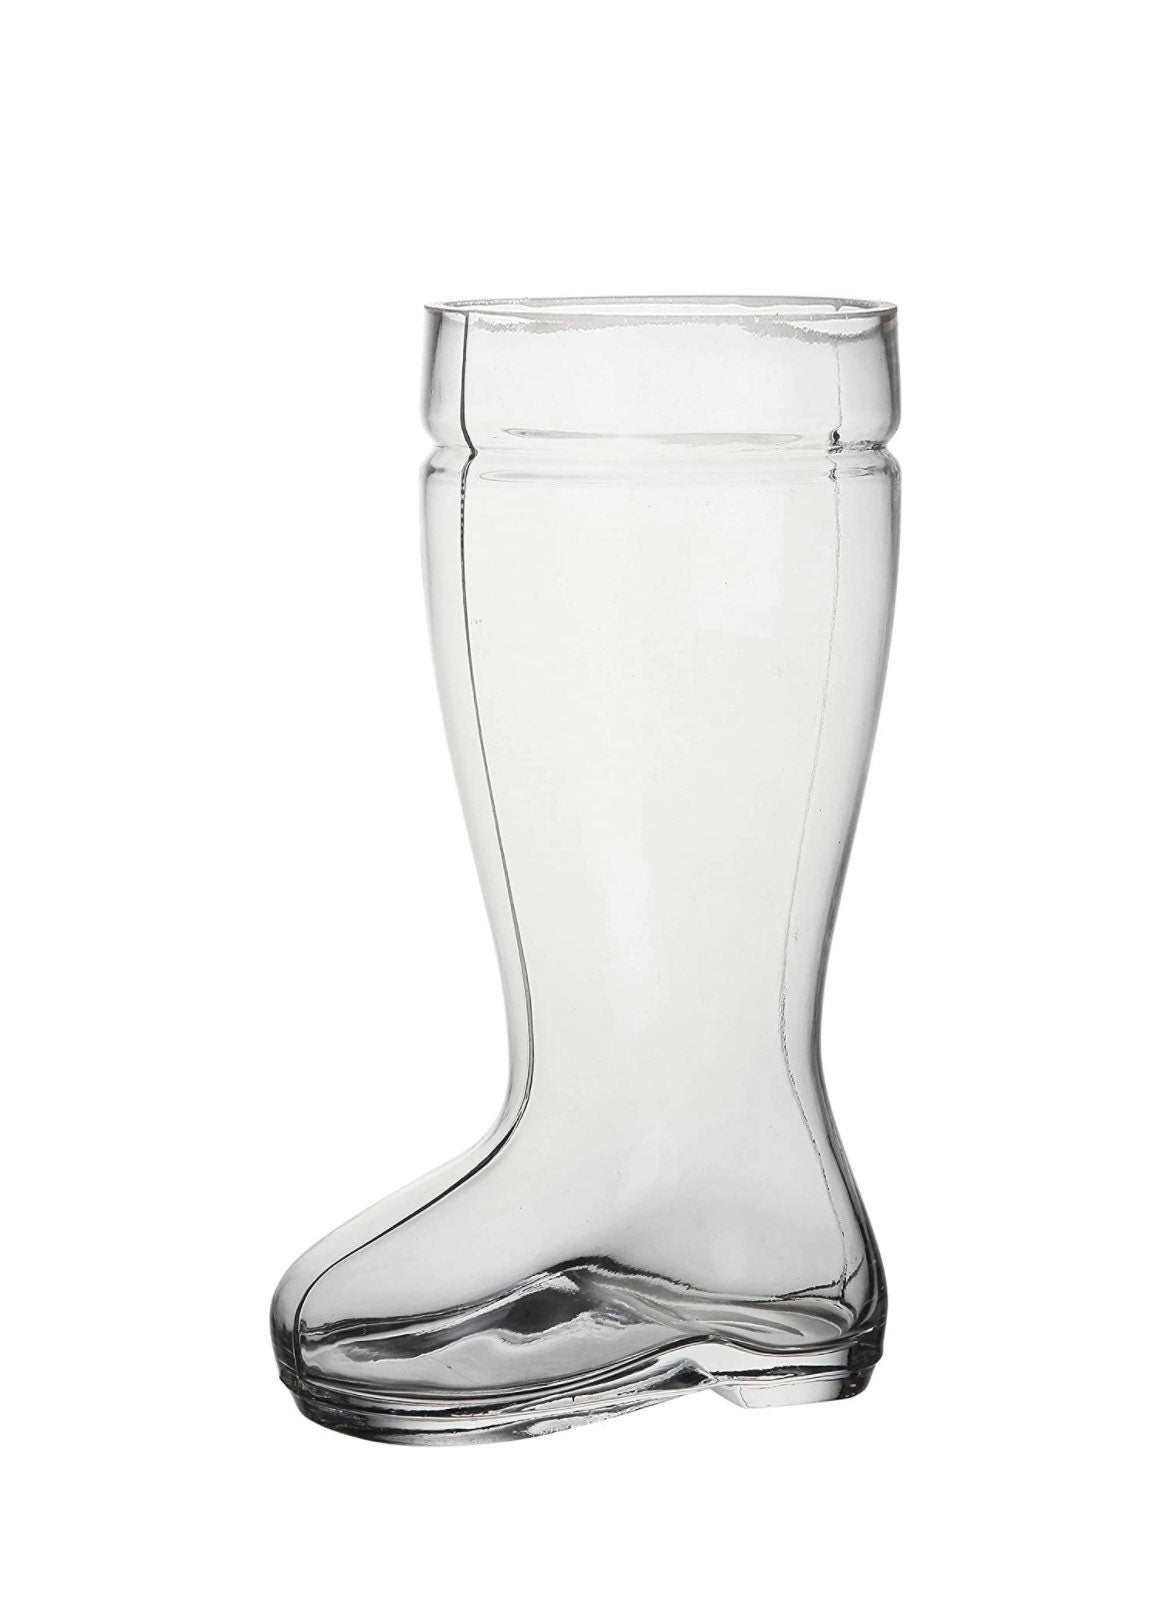 1.5 XL Liter Das Boot Style Beer Glasses. Large German Stein. Set of 2 - Raise The Bar Lux  